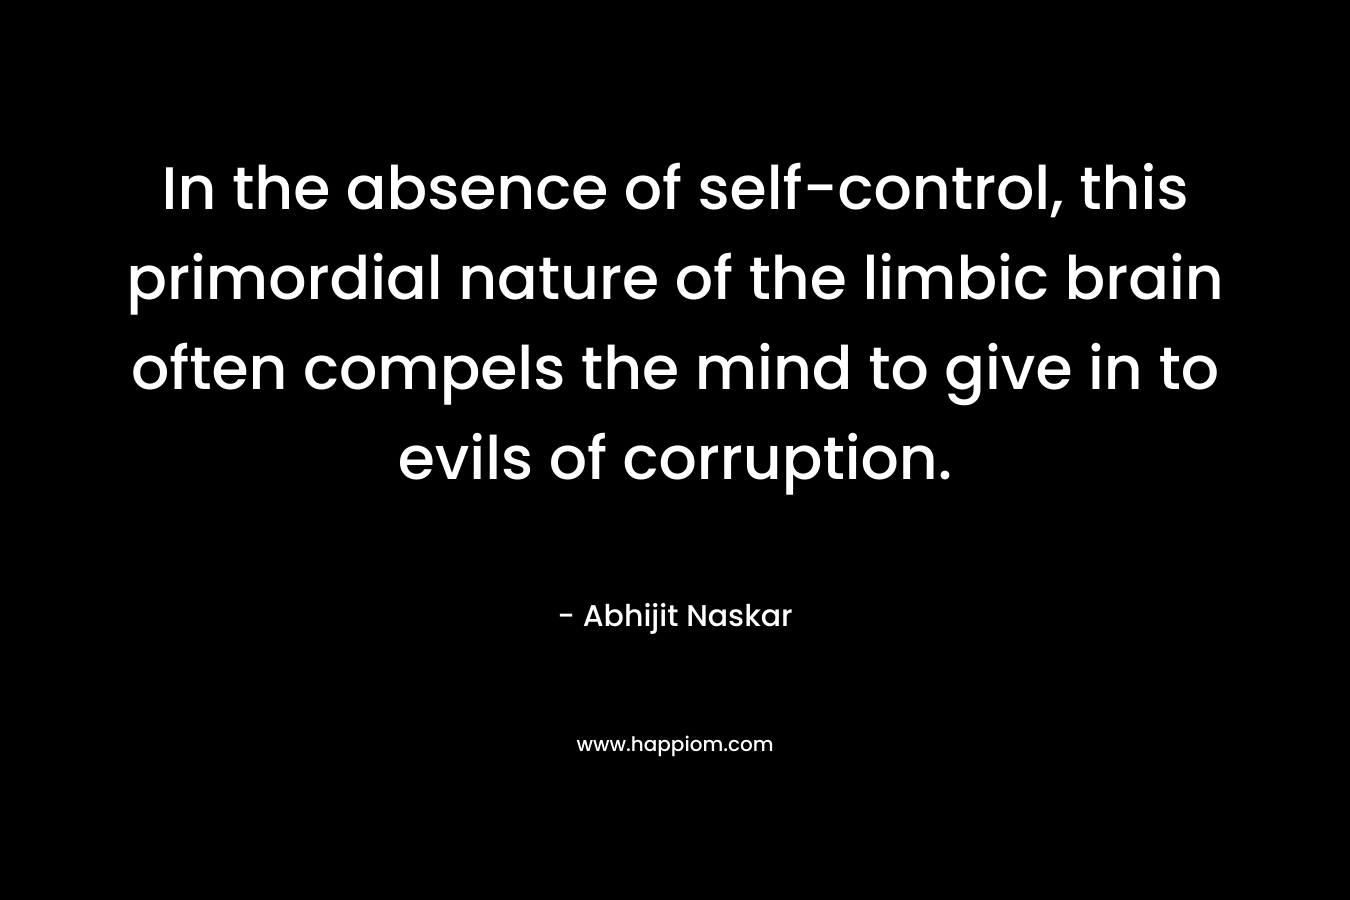 In the absence of self-control, this primordial nature of the limbic brain often compels the mind to give in to evils of corruption.